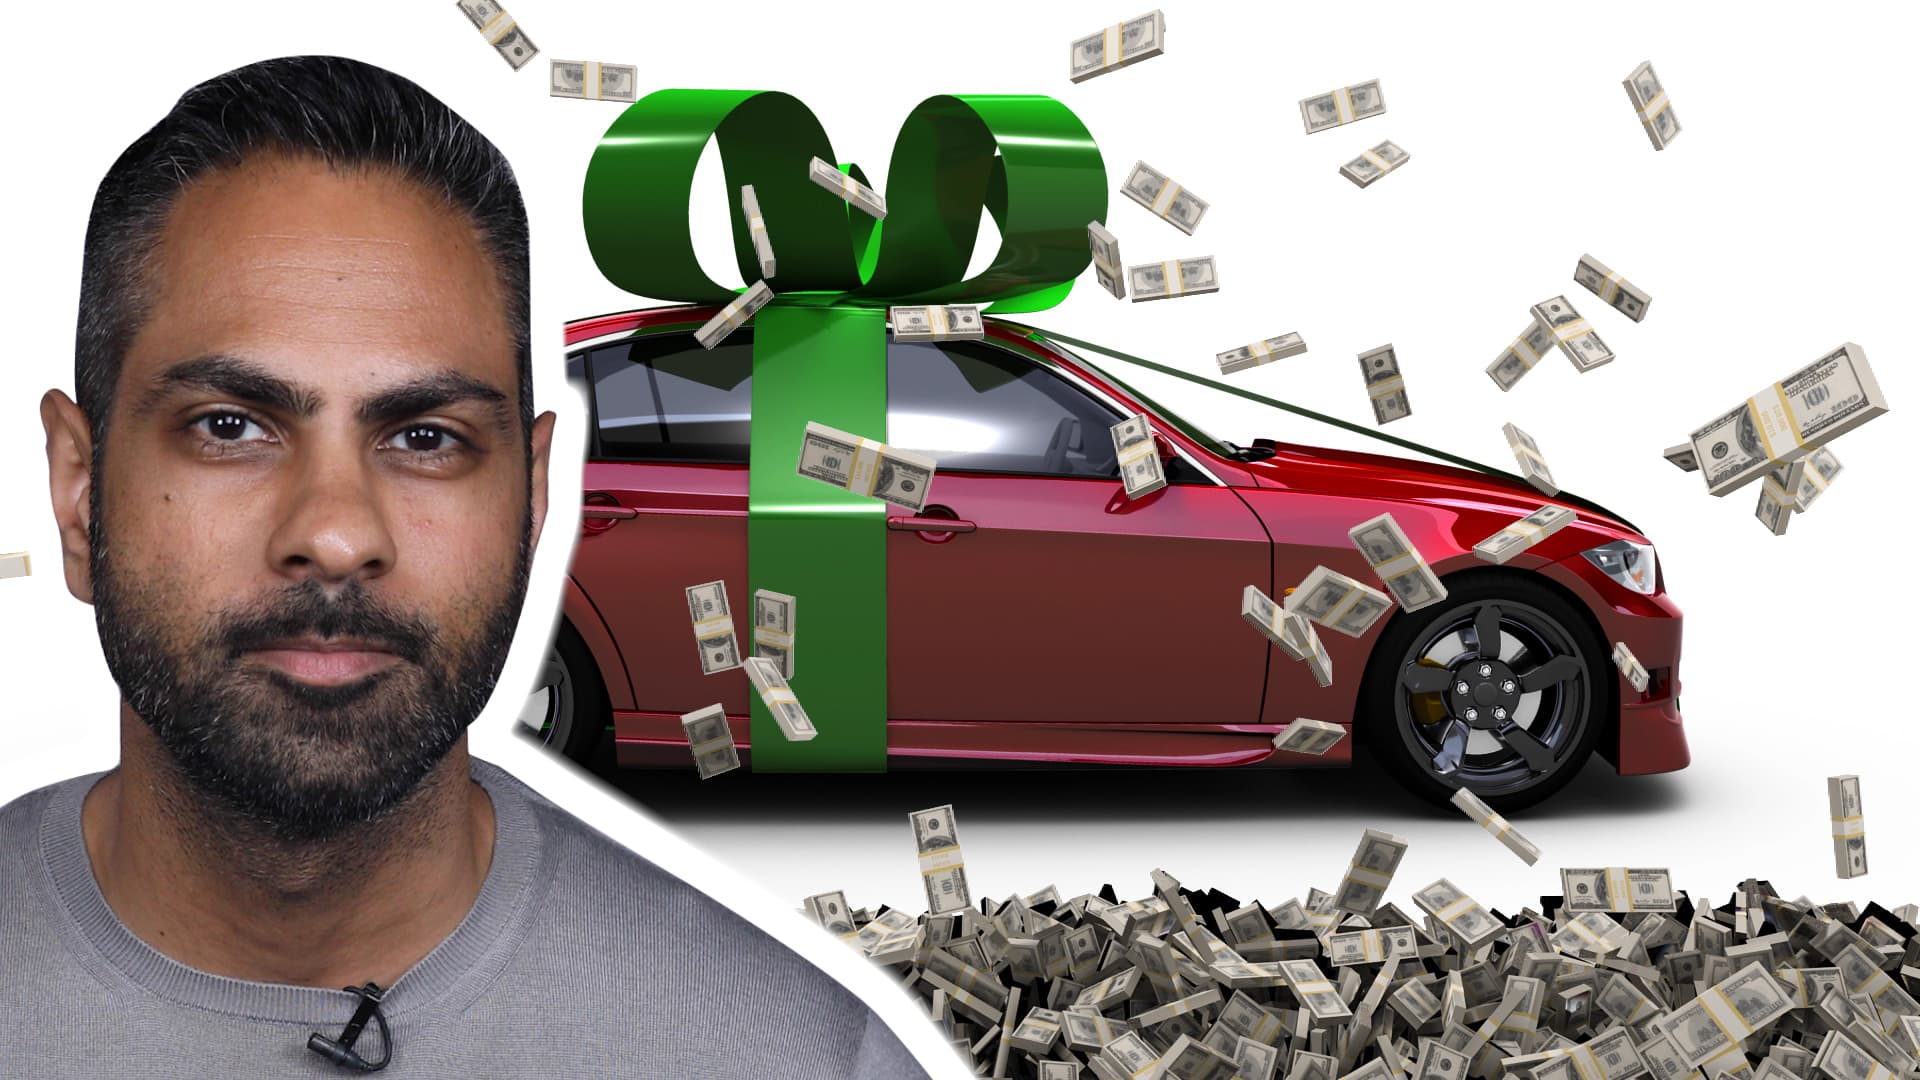 should you buy an expensive car